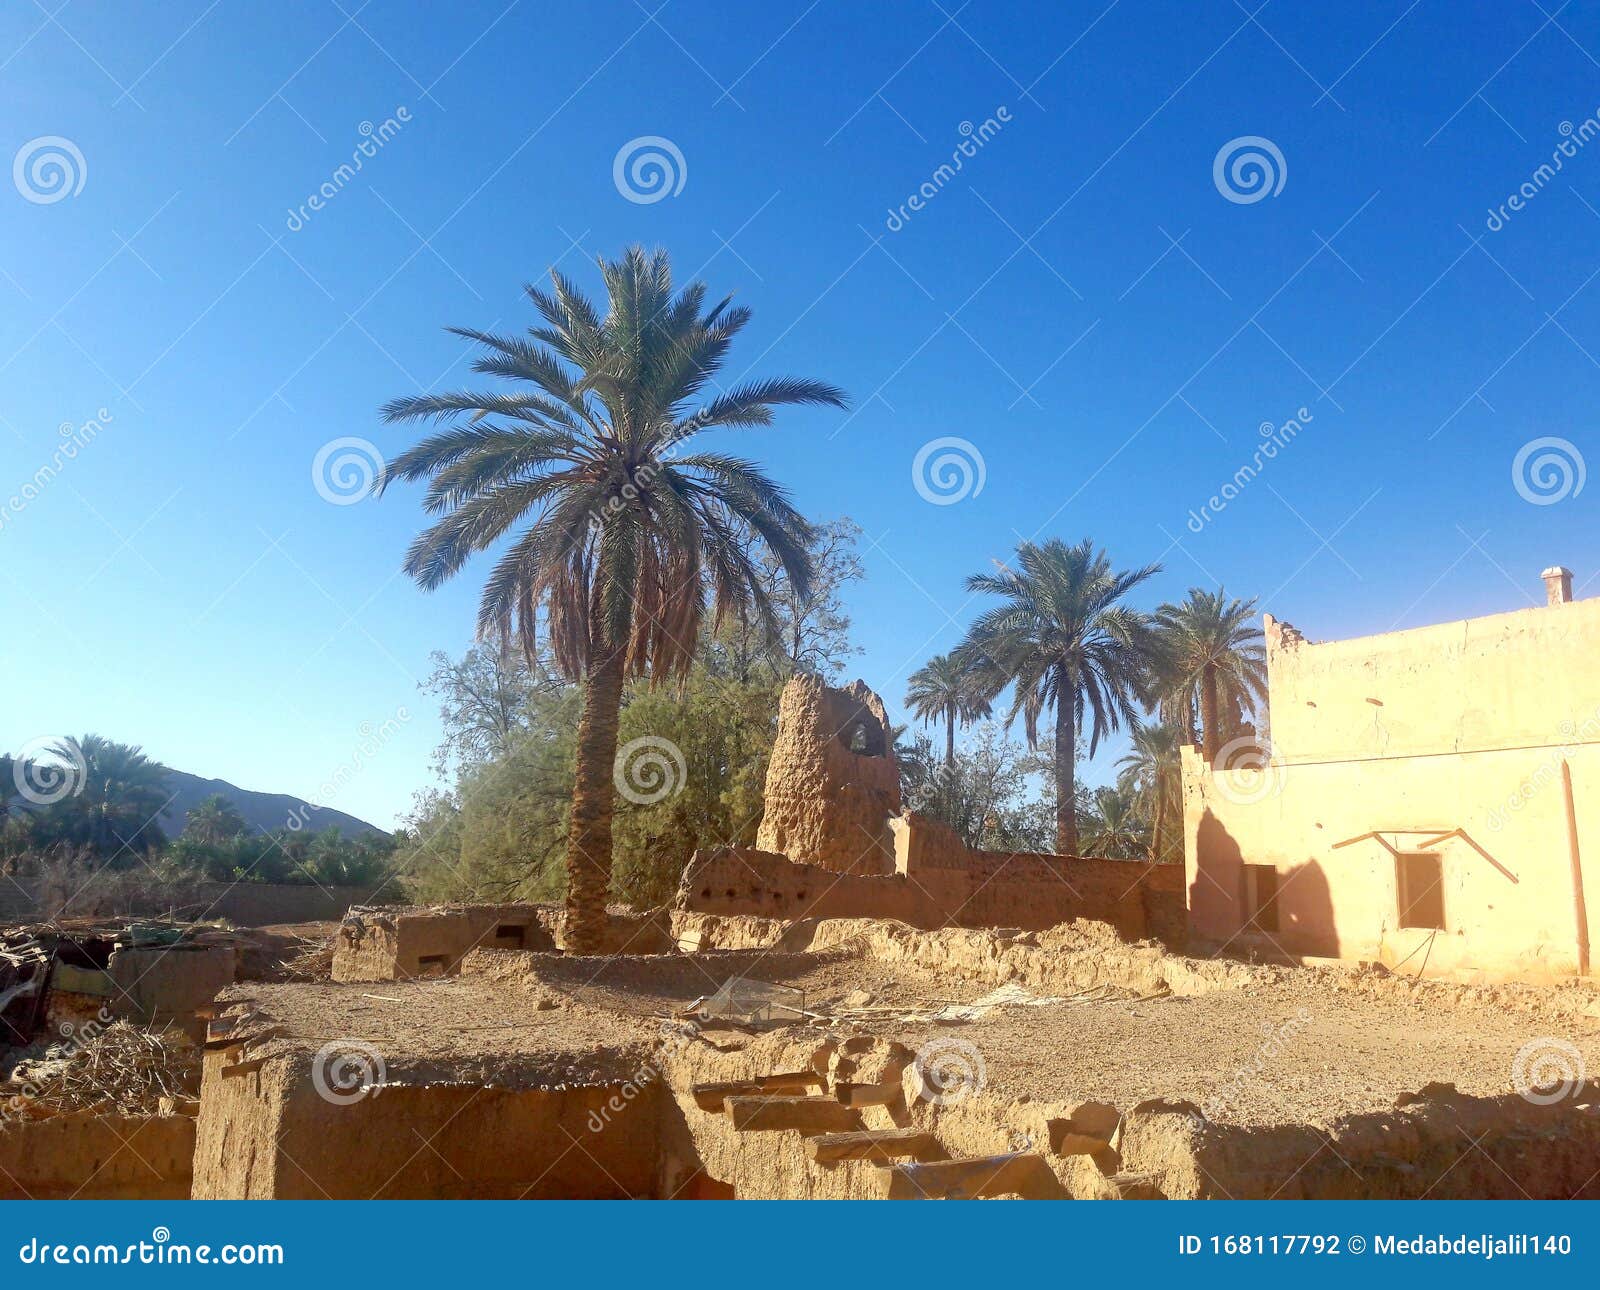 An Old Tower Standing In A Garden Of Palm Trees In The Oasis Of